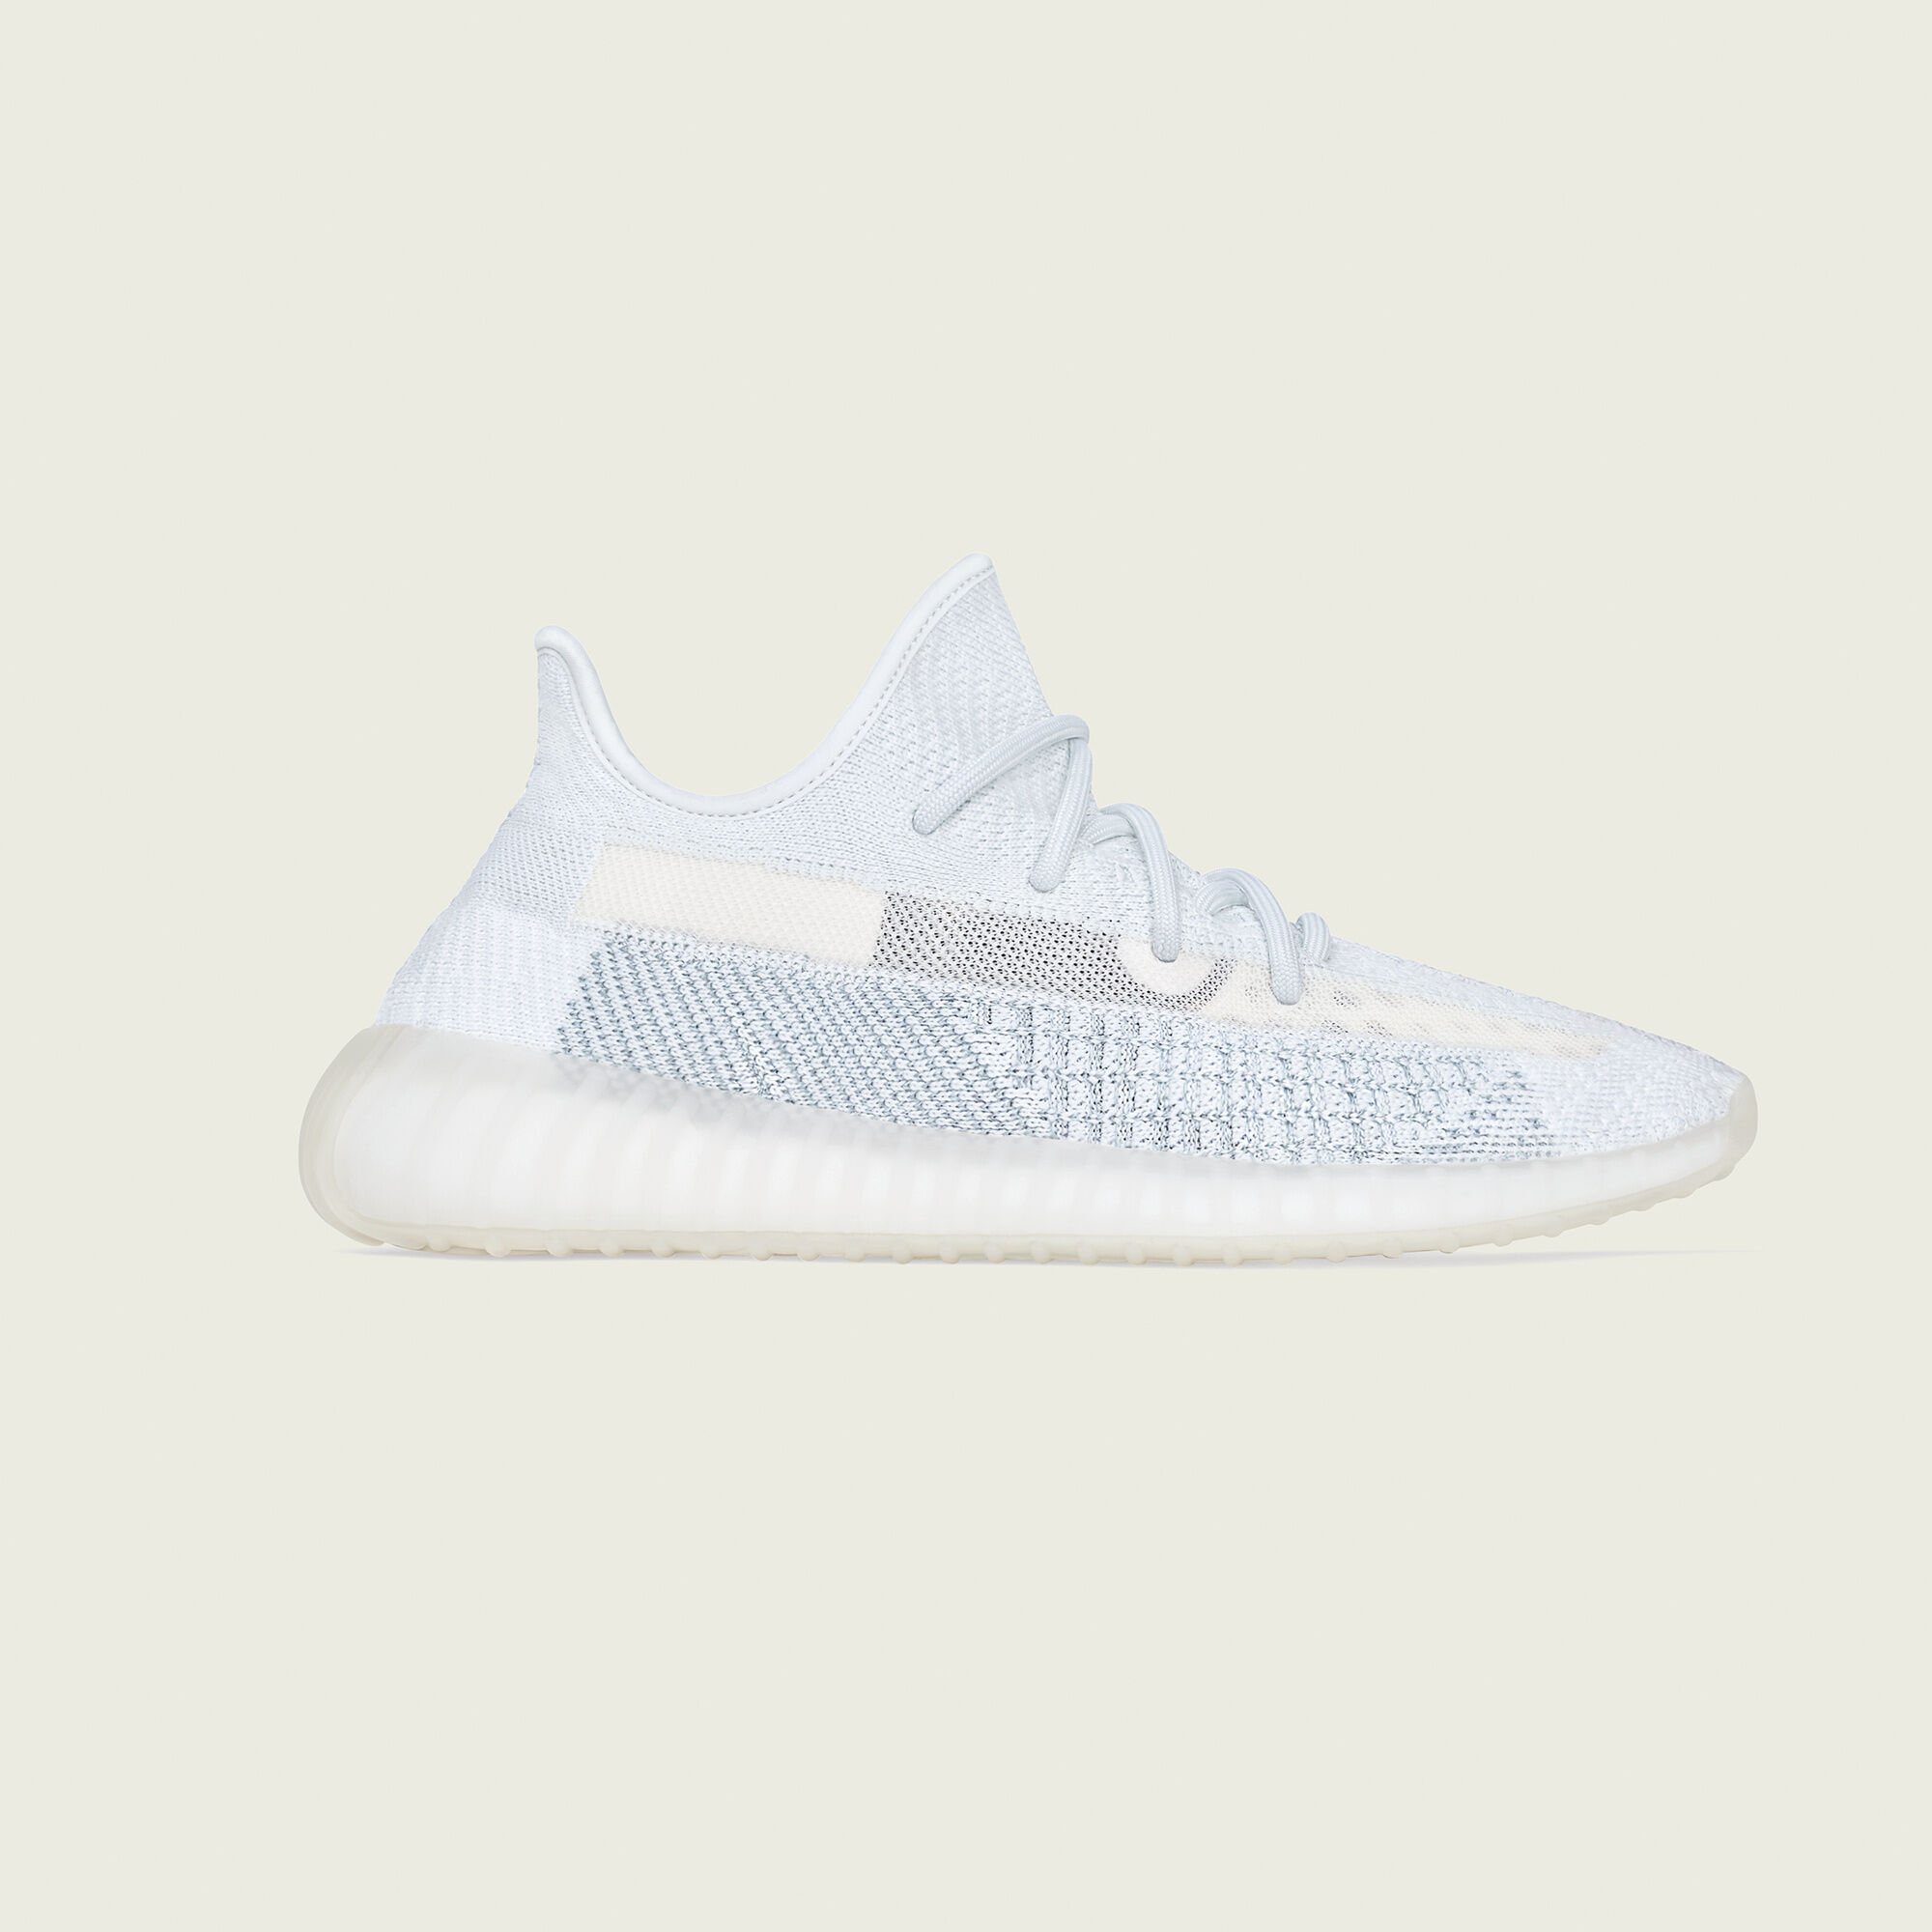 Official Look At The Adidas Yeezy Boost 350 V2 “Cloud White”